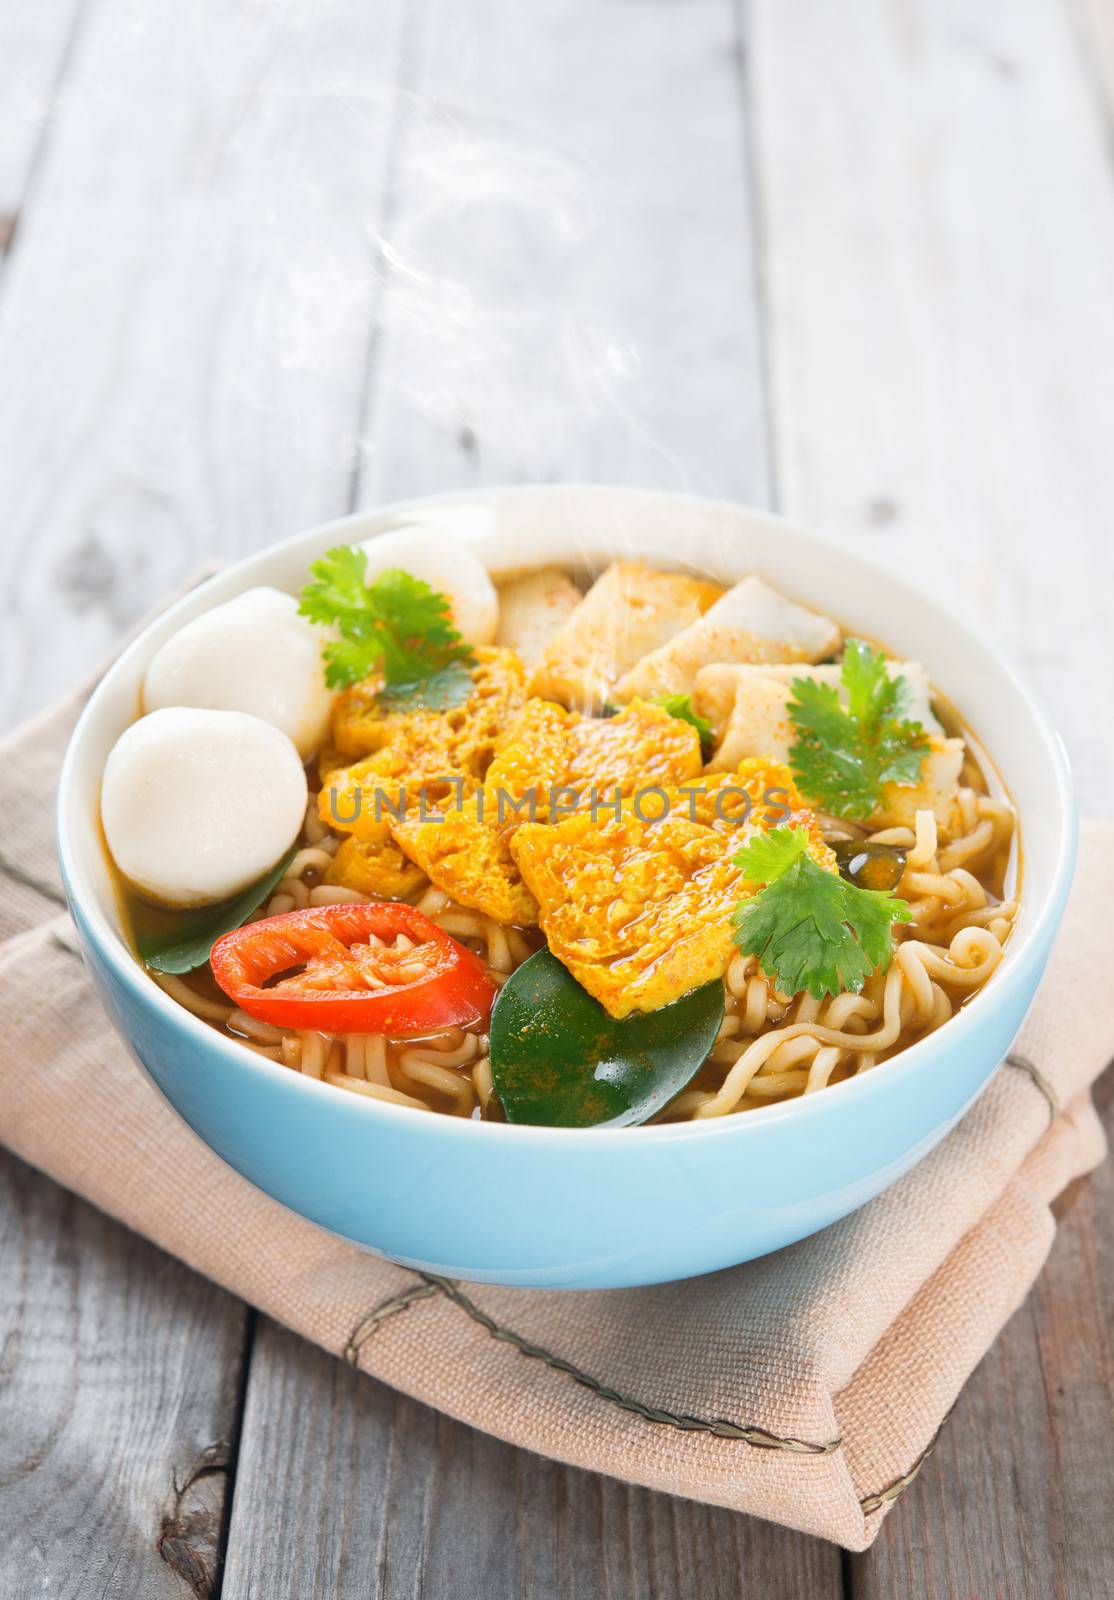 Spicy curry instant noodles. Asian cuisine, ready to serve on wooden dining table setting. Fresh hot with steamed smoke.